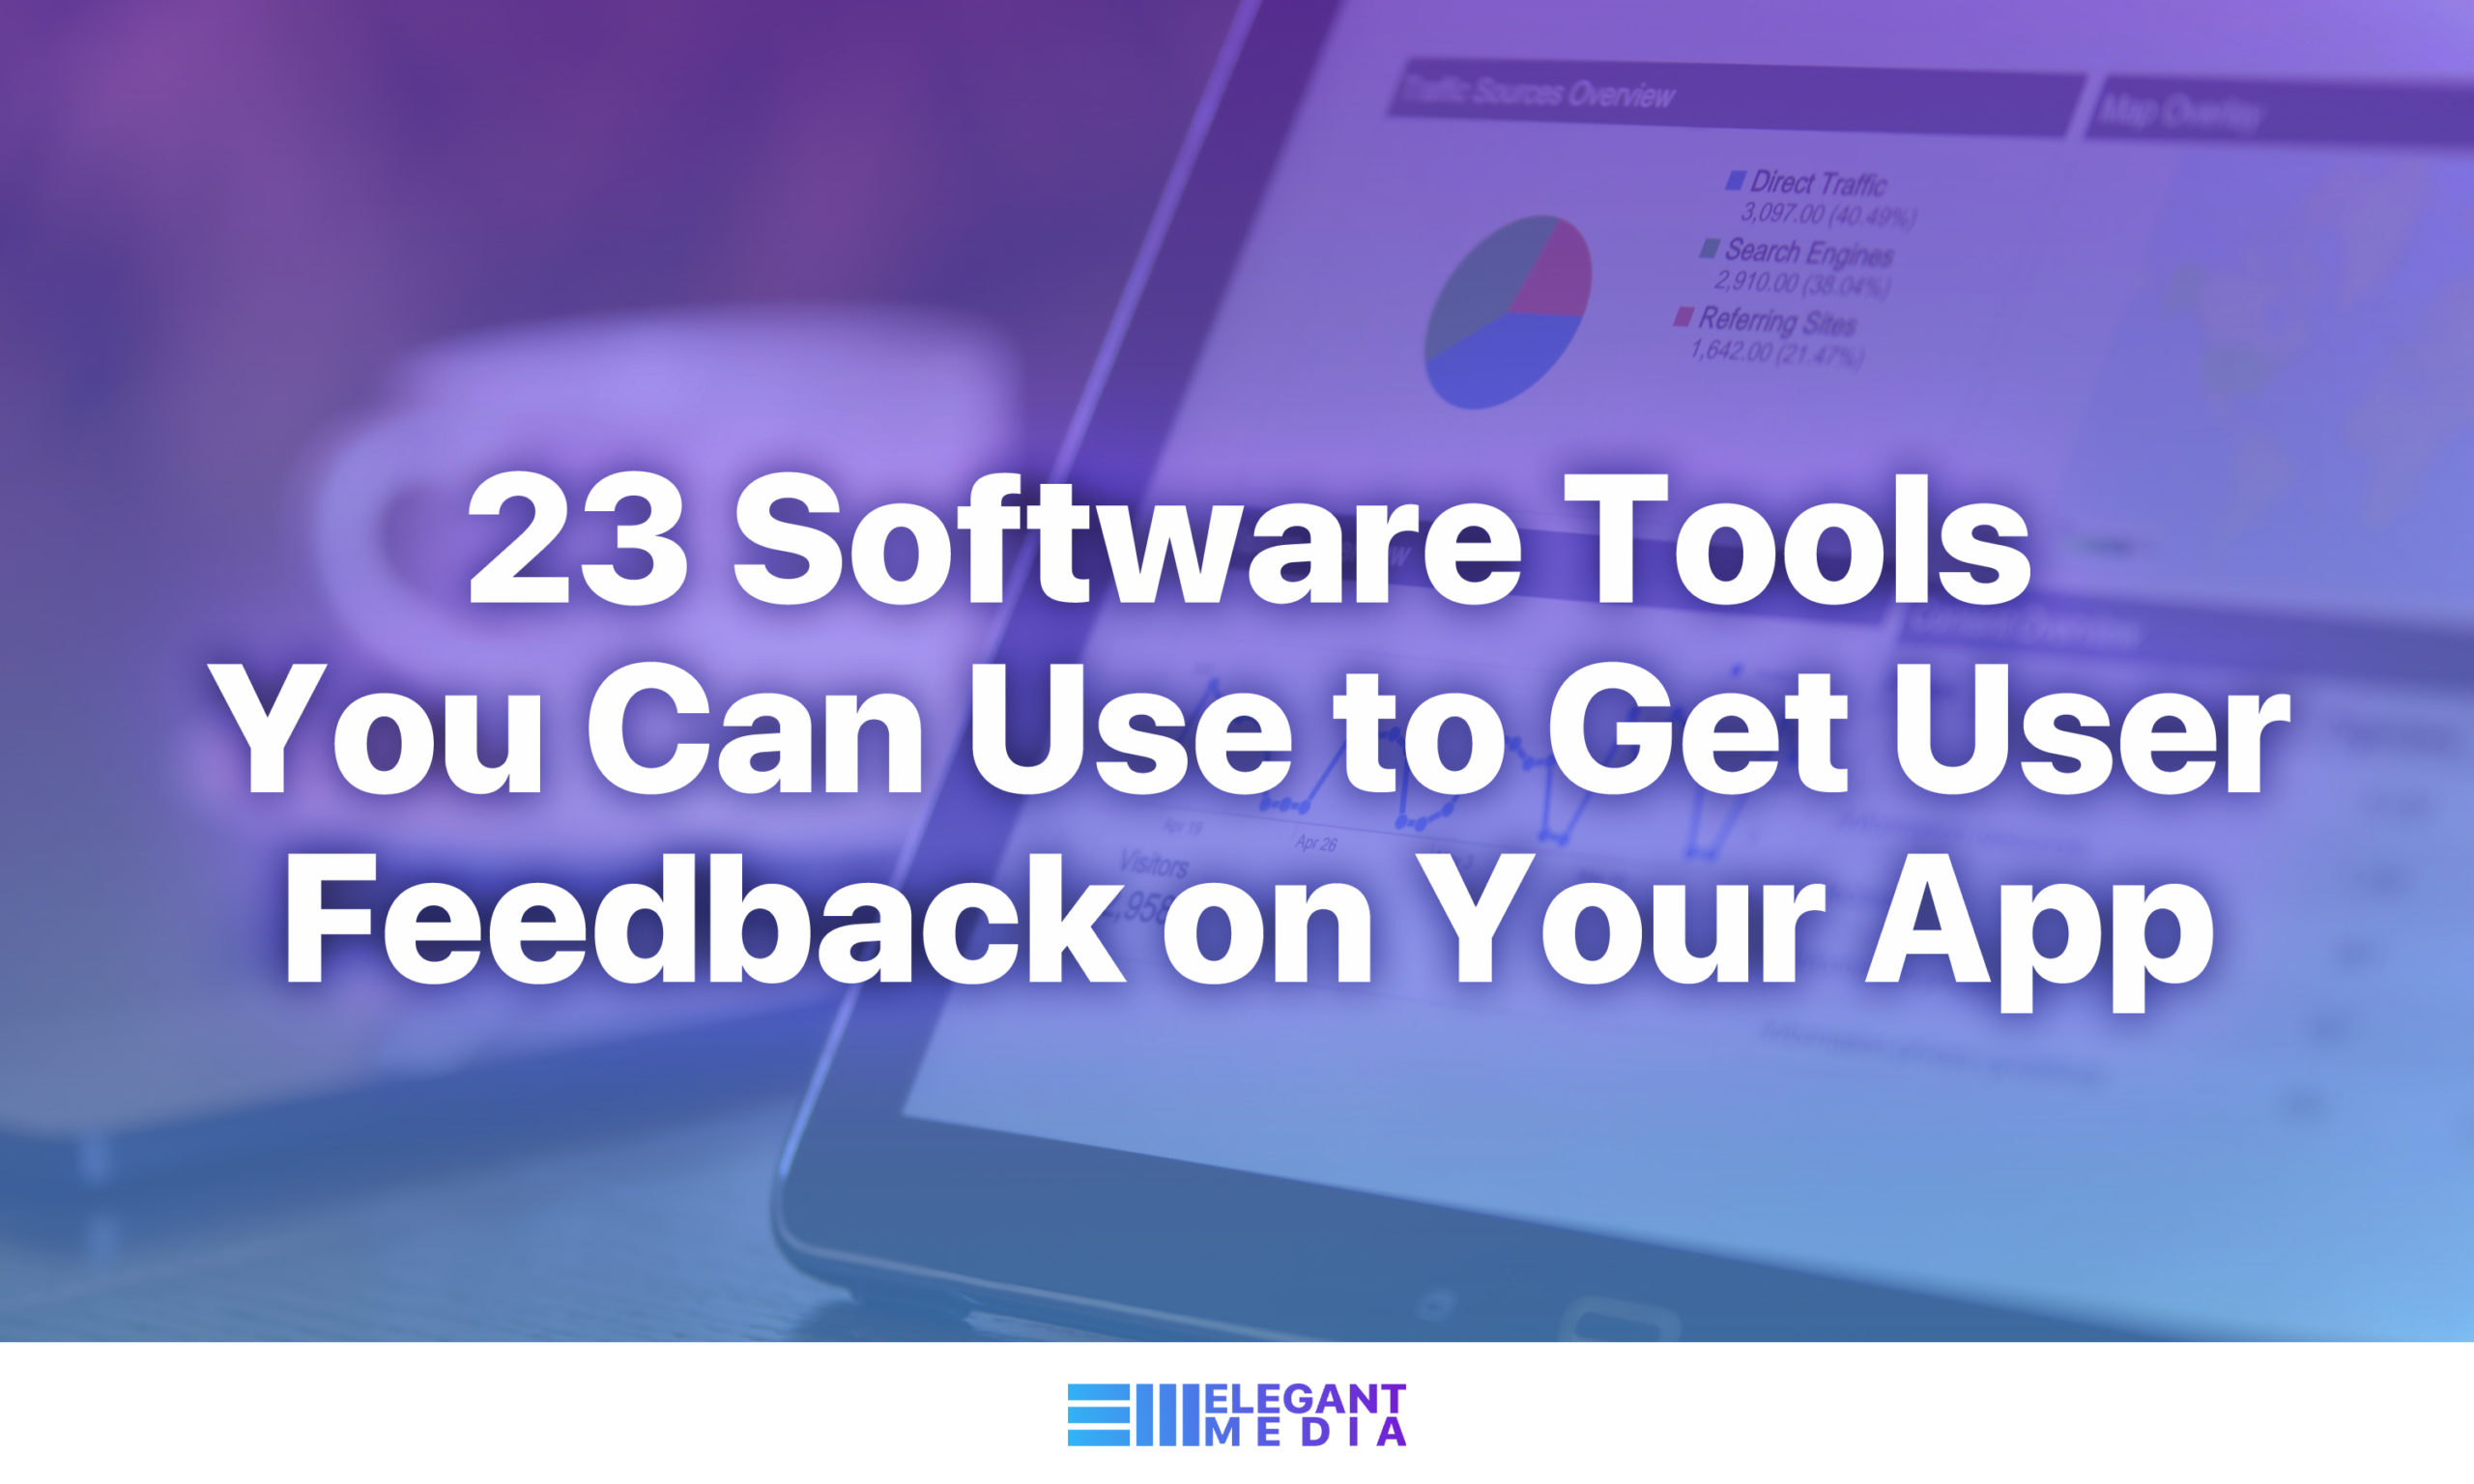 23 Software Tools You Can Use to Get User Feedback on Your App